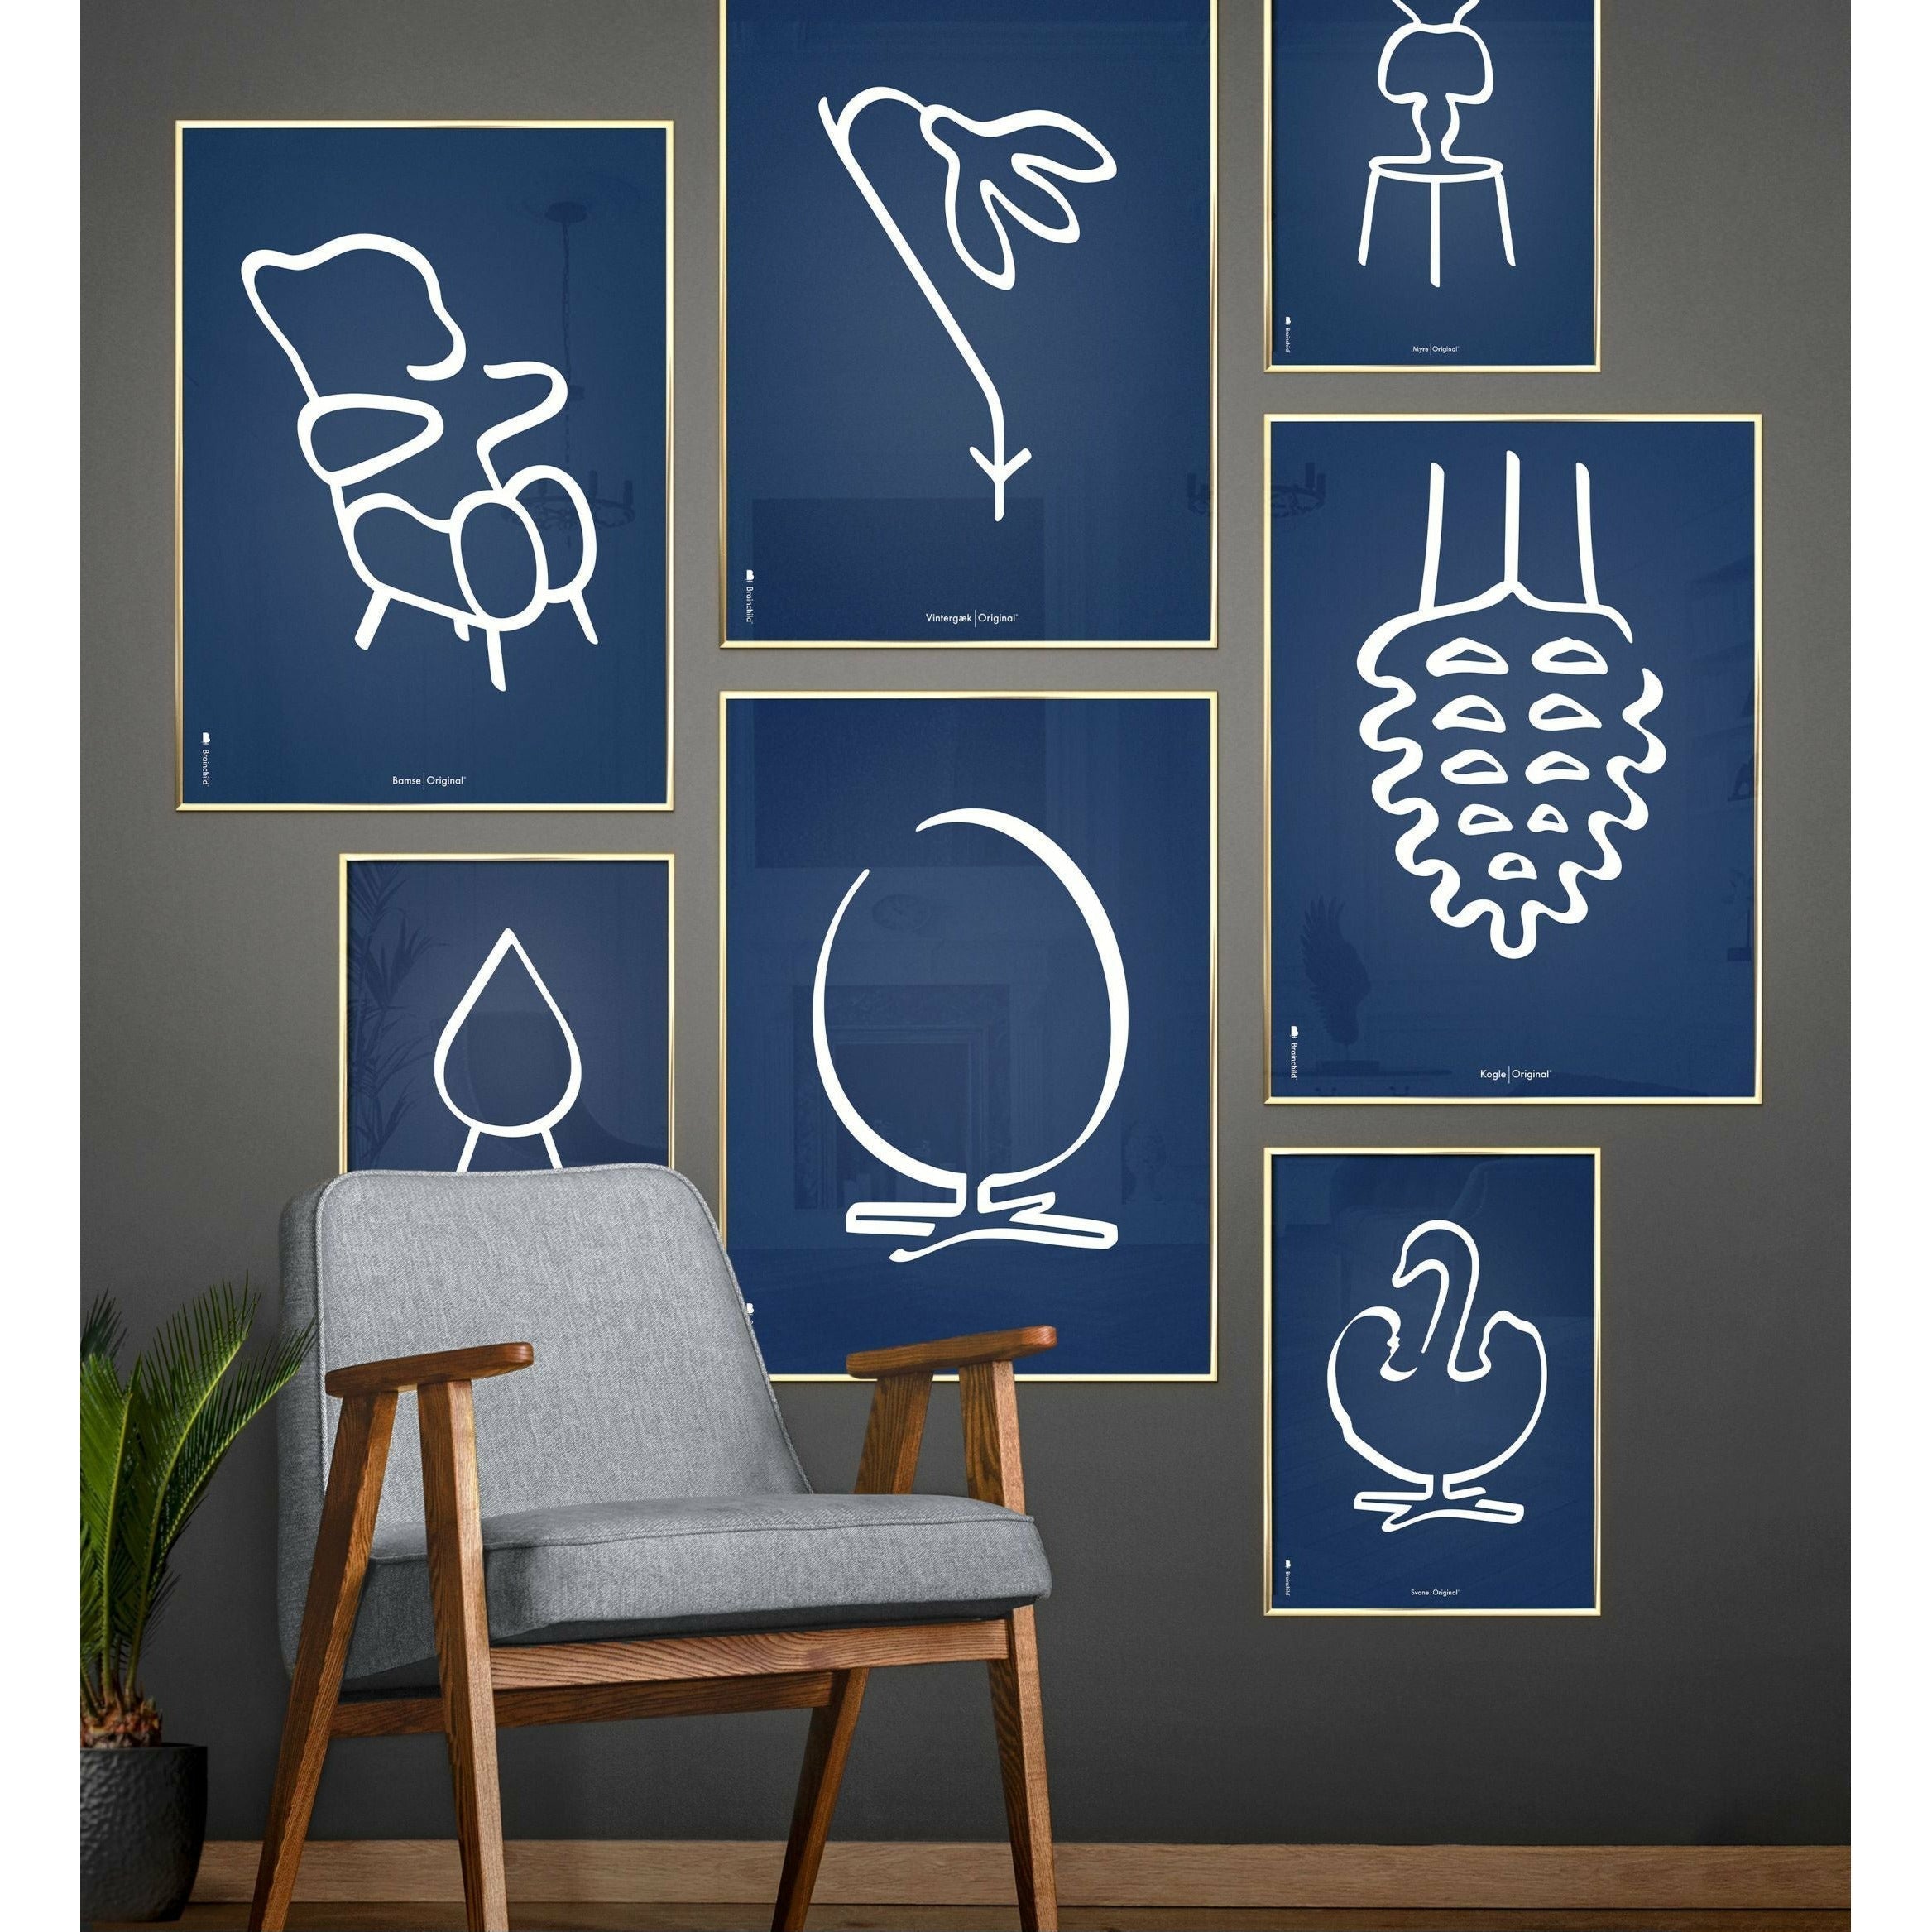 Brainchild Teddy Bear Line Poster, Frame In Black Lacquered Wood A5, Blue Background